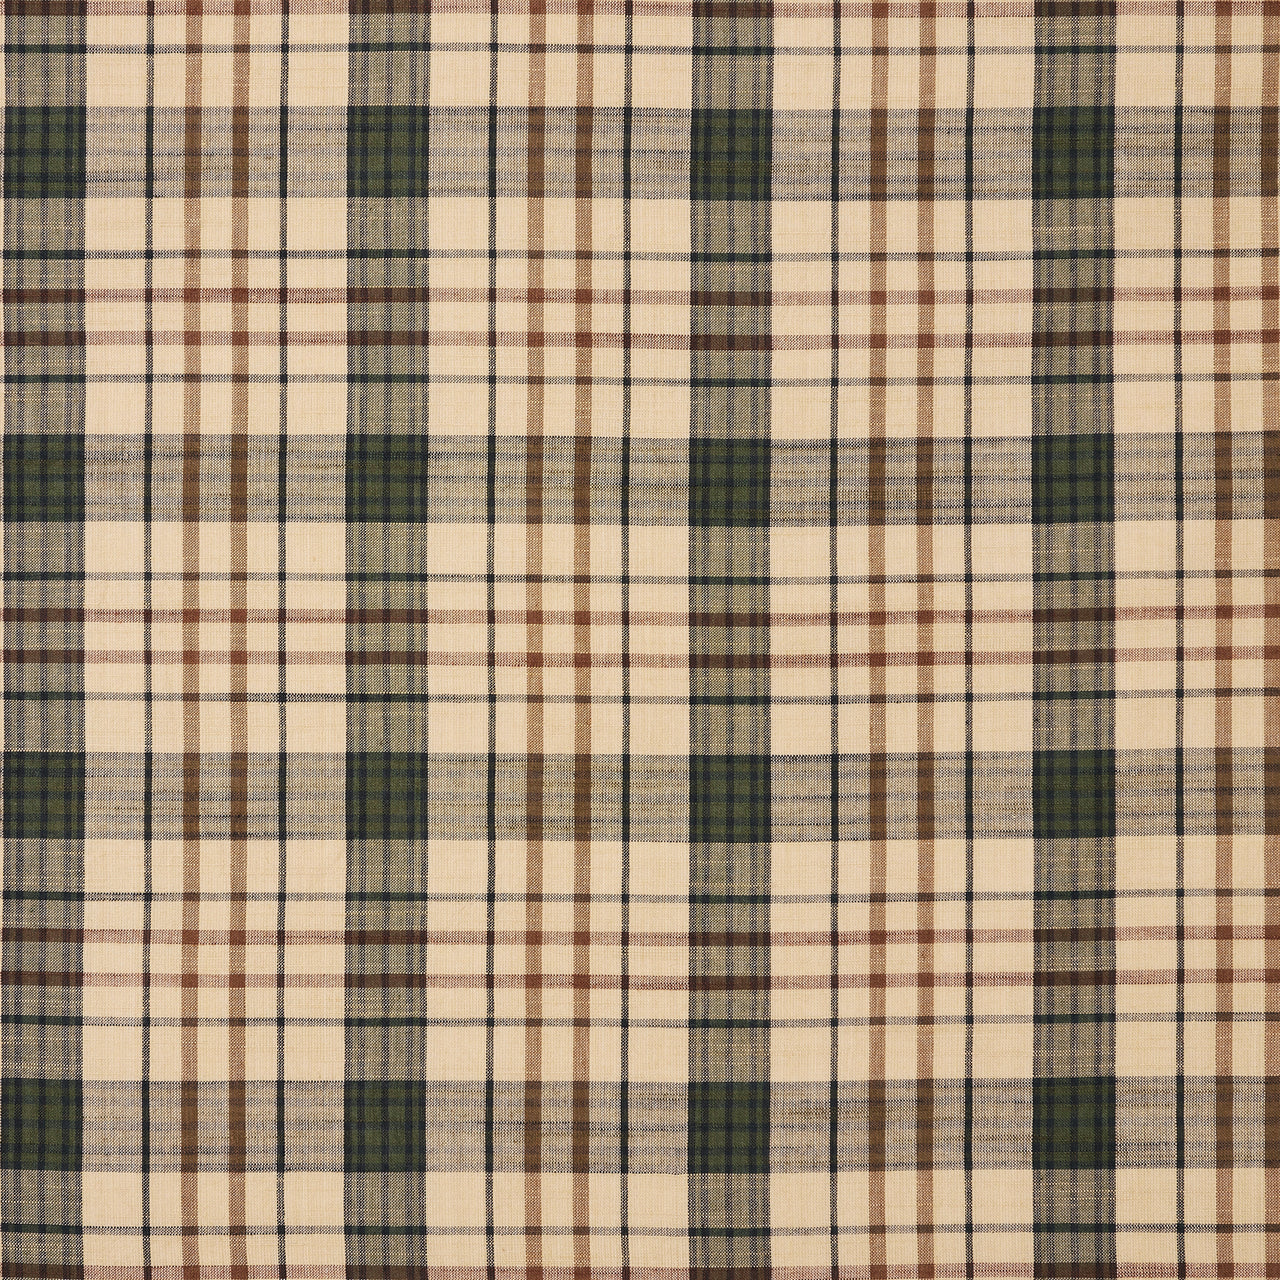 Cider Mill Plaid Swag Set of 2 36x36x16 VHC Brands